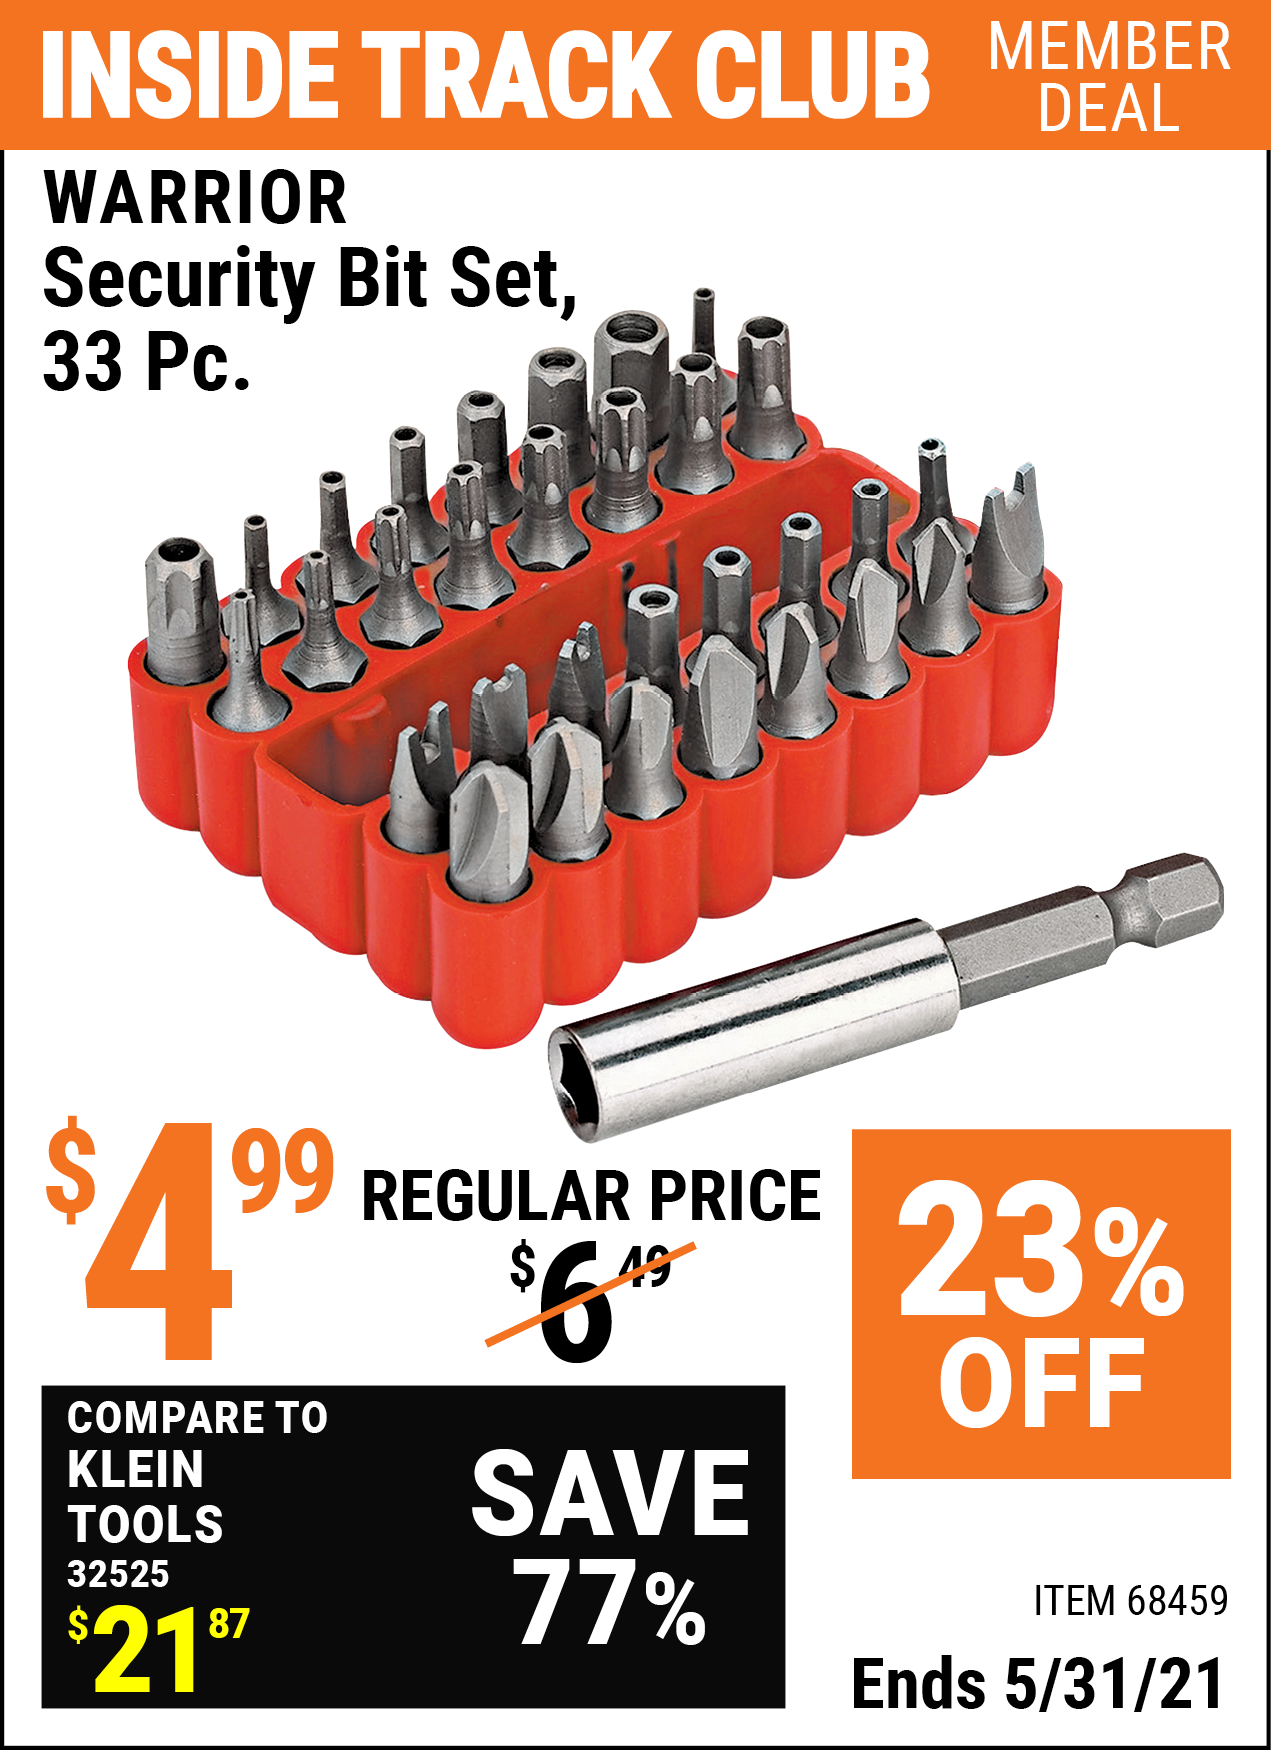 Inside Track Club members can buy the WARRIOR Security Bit Set 33 Pc. (Item 68459) for $4.99, valid through 5/31/2021.